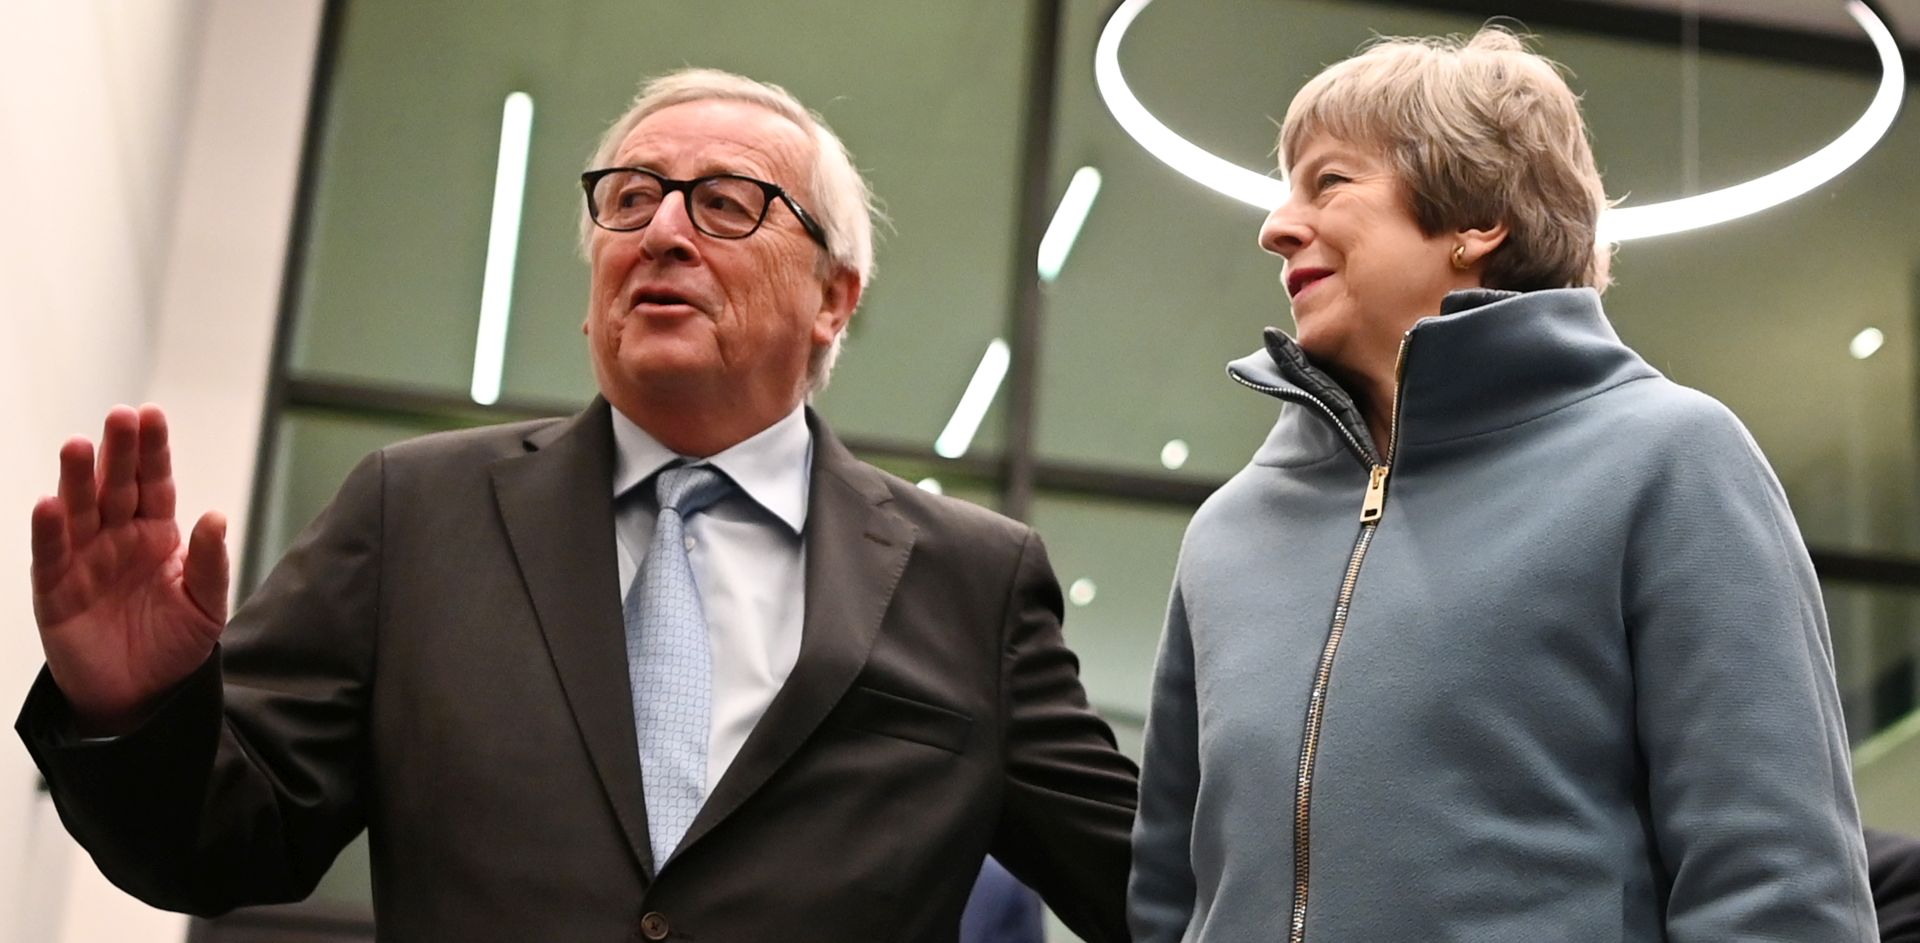 epa07429702 Jean-Claude Juncker, President of the European Commission, (L) welcomes British Prime Minister Theresa May (R) at the European Parliament in Strasbourg, France, 11 March 2019. May is facing a decisive week ahead with crucial votes on Brexit expected.  EPA/PATRICK SEEGER